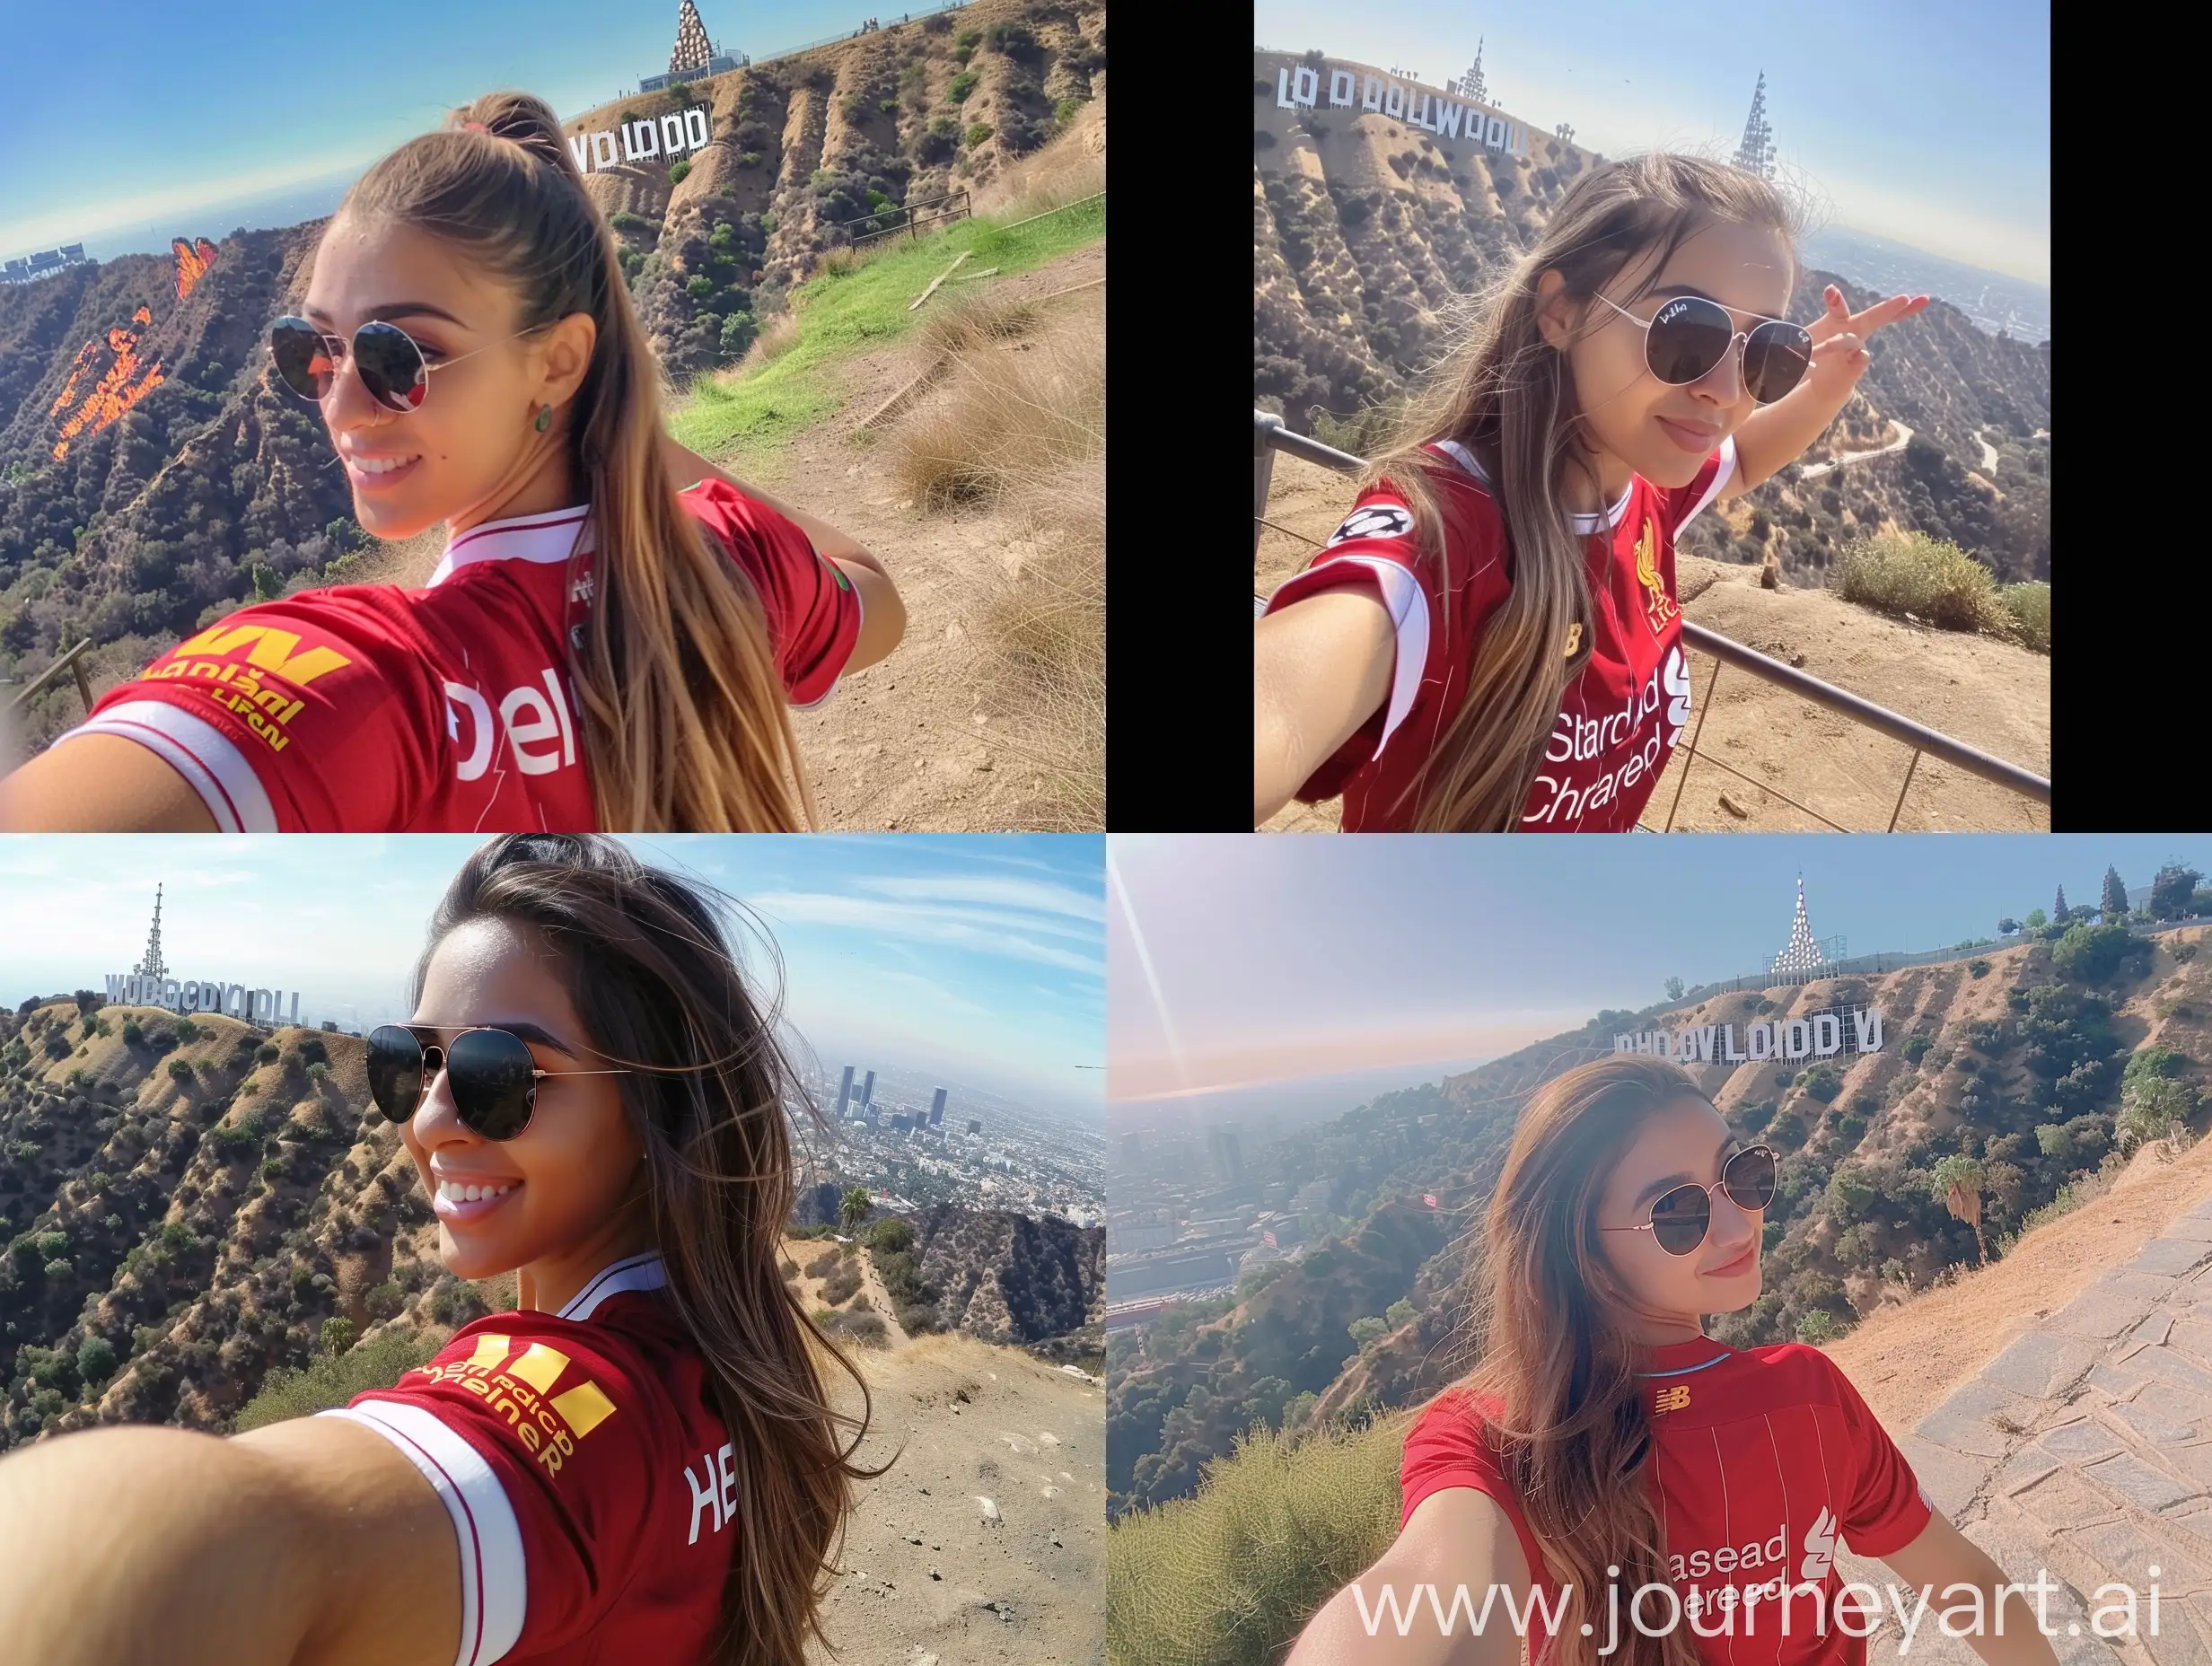 Dela Rostami from behind with long hair, round nose,wearing sunglasses and liverpool fc jersey is taking a selfie inferno of Hollywood sign 